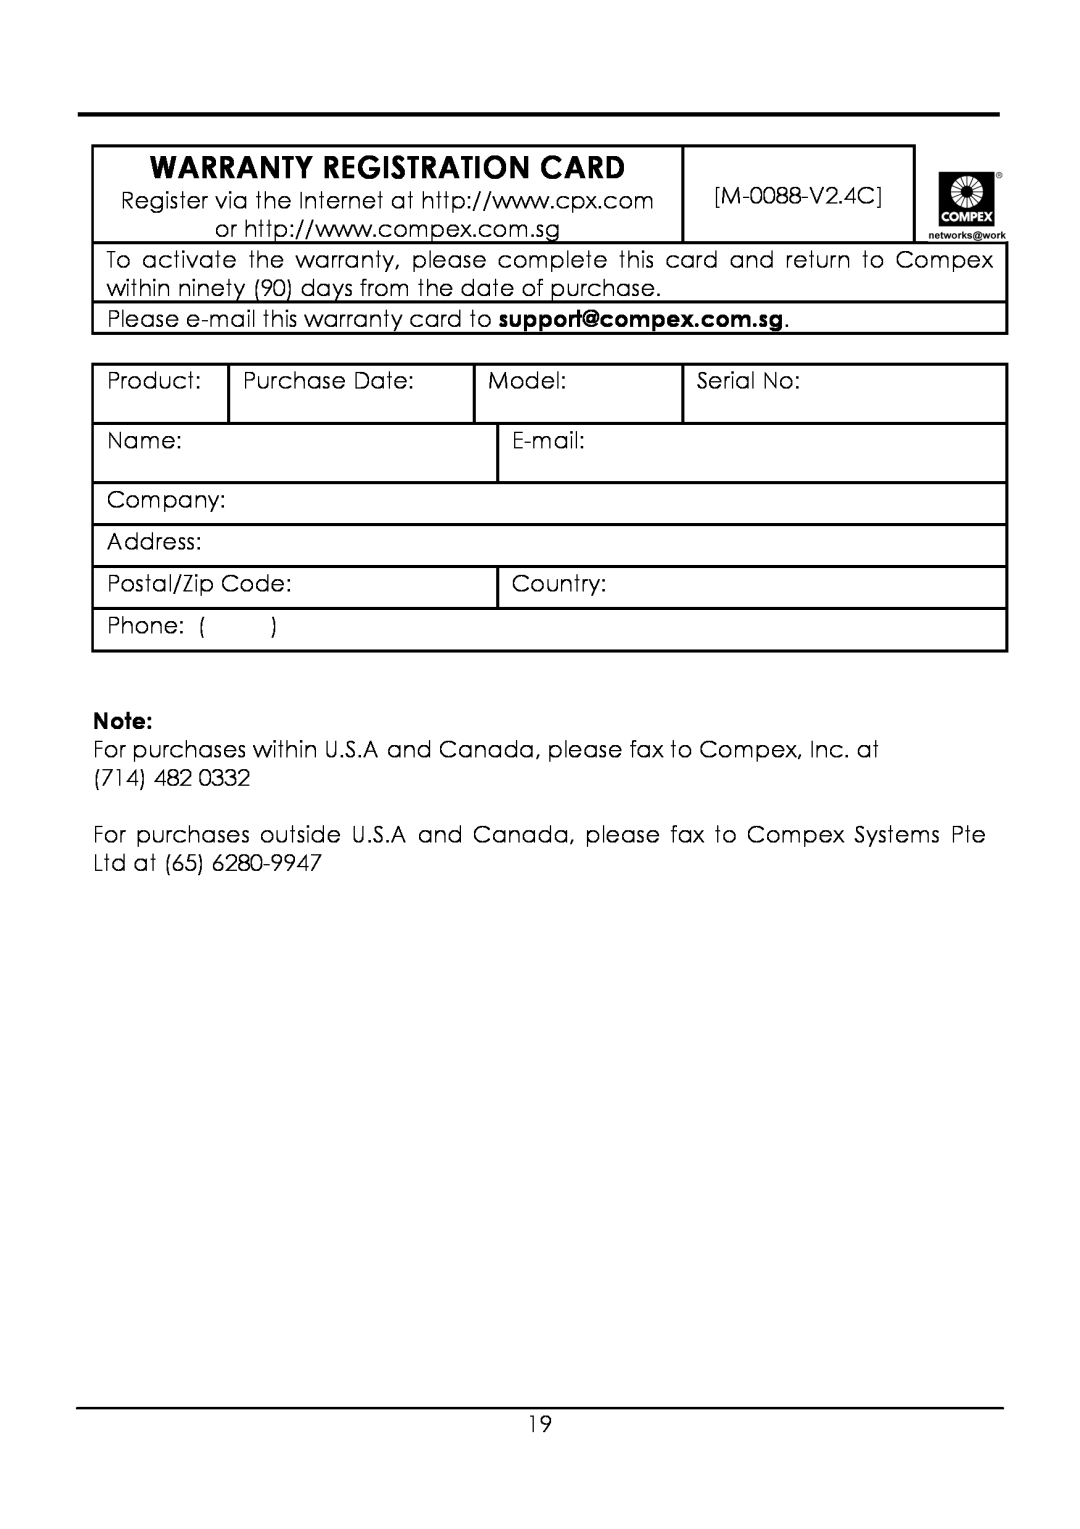 Compex Systems WPE54G manual Warranty Registration Card 